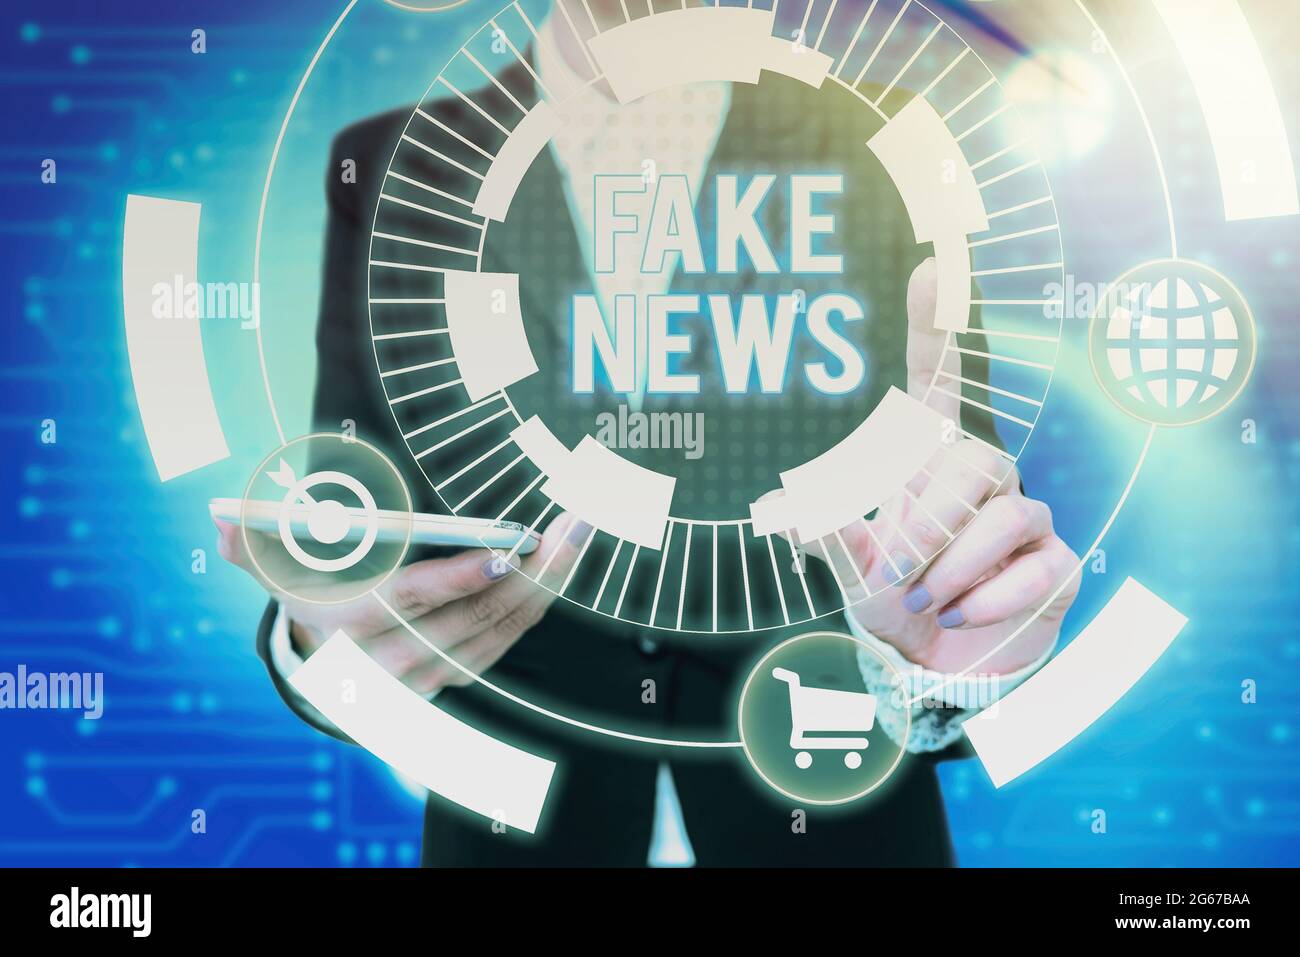 Hand writing sign Fake News. Internet Concept false information publish under the guise of being authentic news Lady In Uniform Holding Phone Pressing Stock Photo